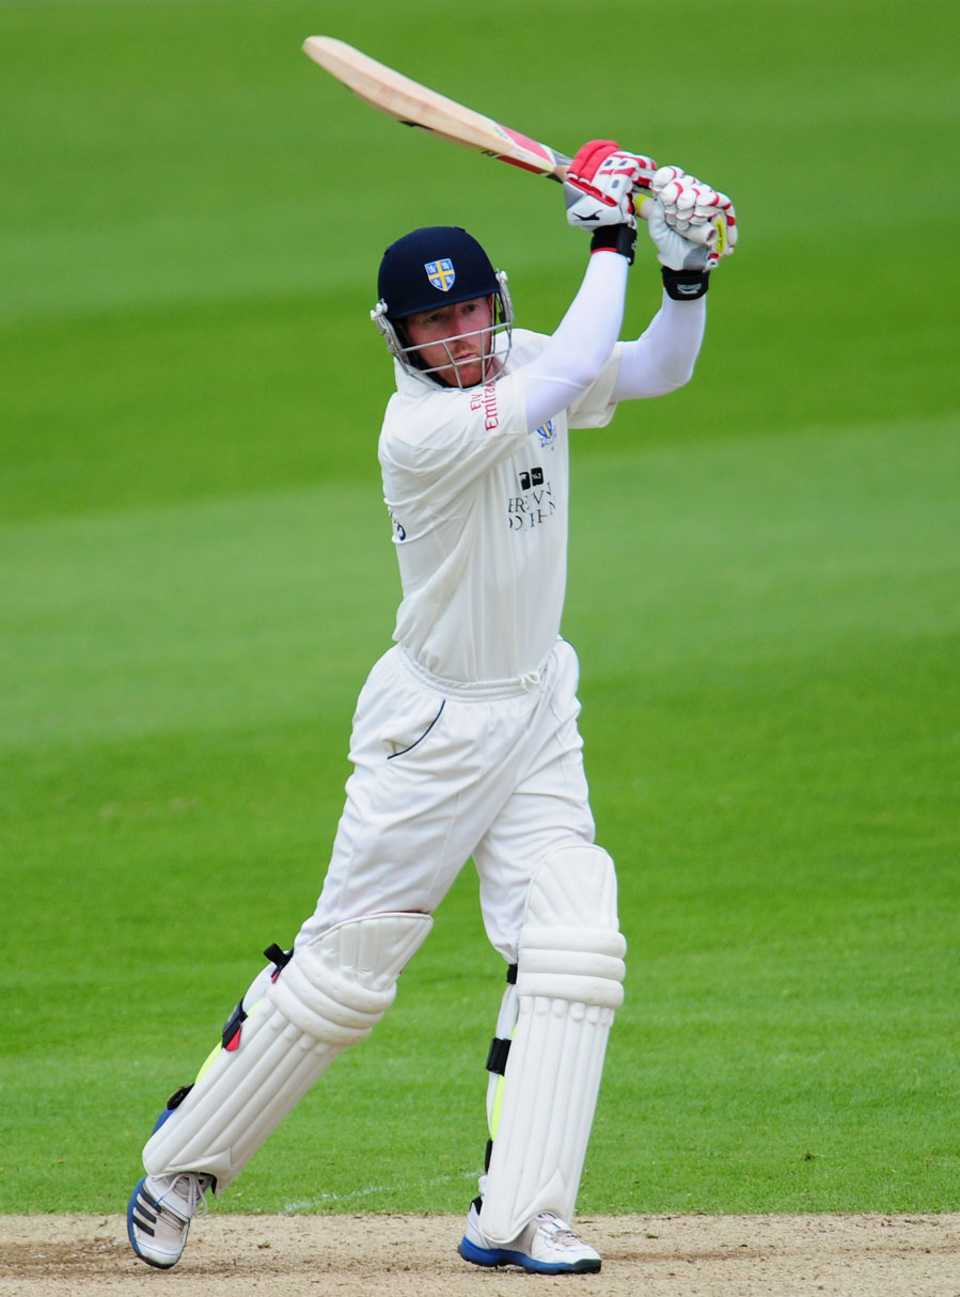 Paul Collingwood scored a half-century, Durham v Lancashire, County Championship, Division One, Chester-le-Street, 3rd day, June 1, 2012